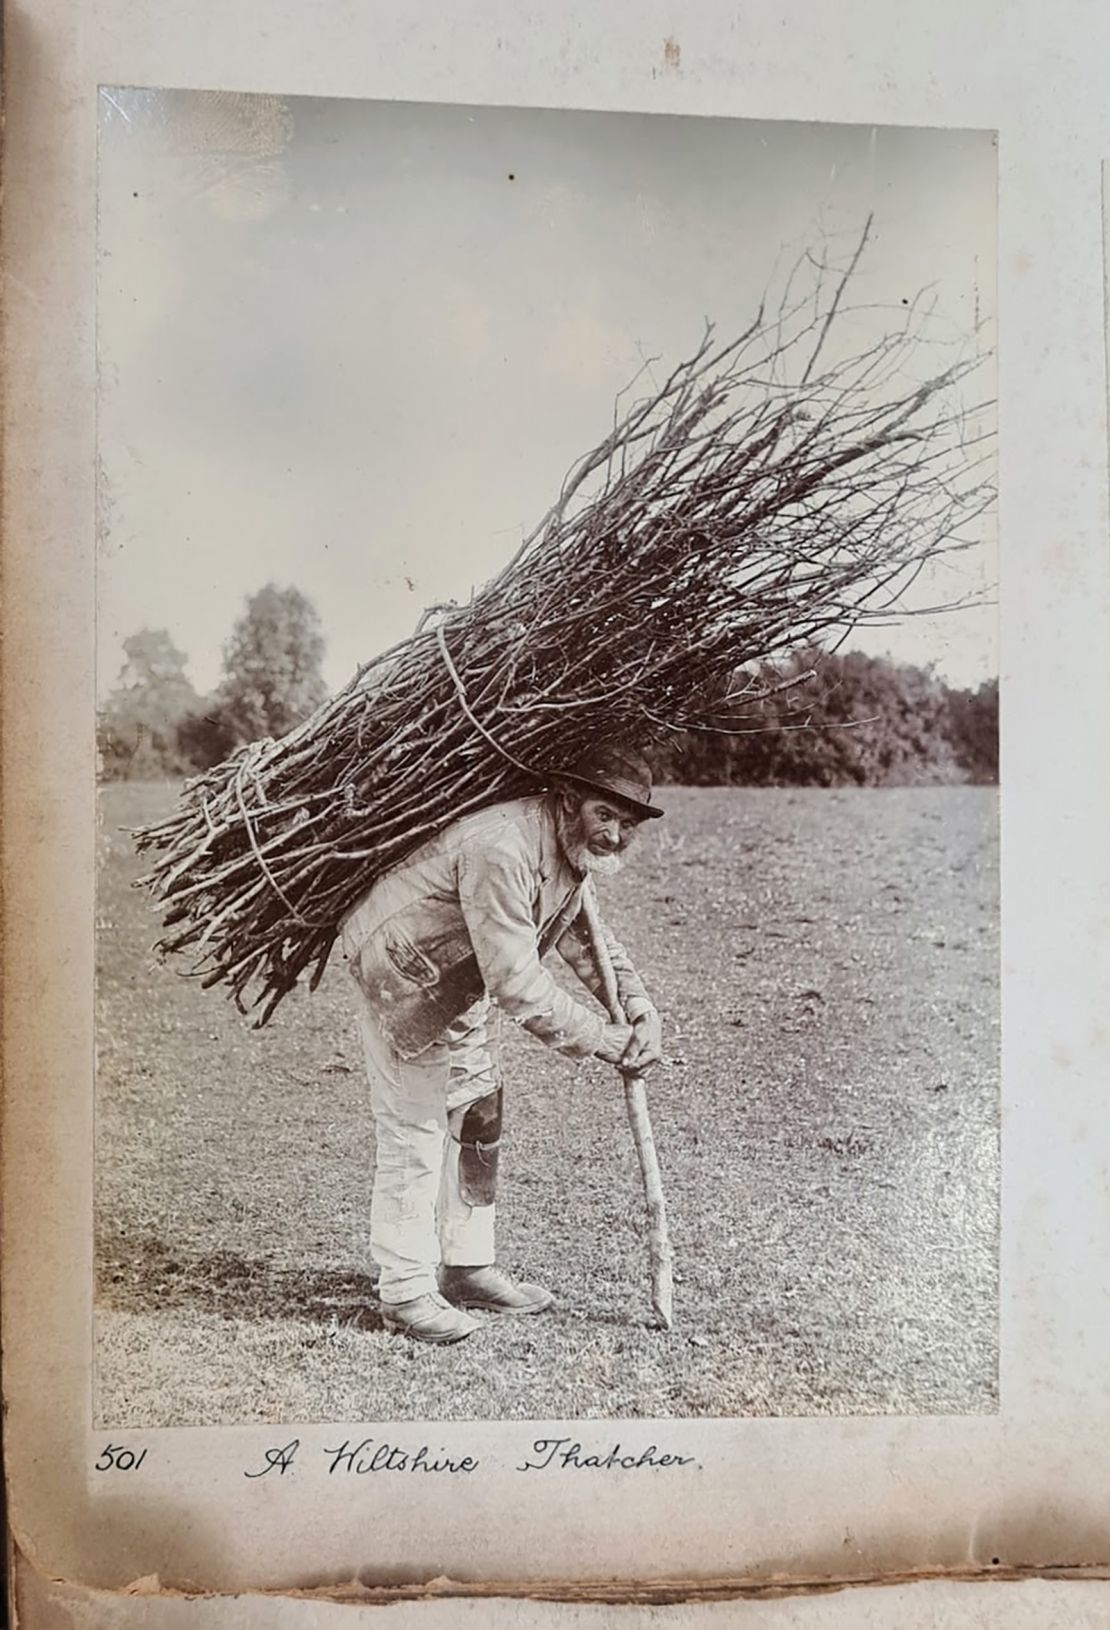 The original black and white photograph of the "Stick Man," now known to be a Wiltshire thatcher, was rediscovered by a research fellow at the University of the West of England.